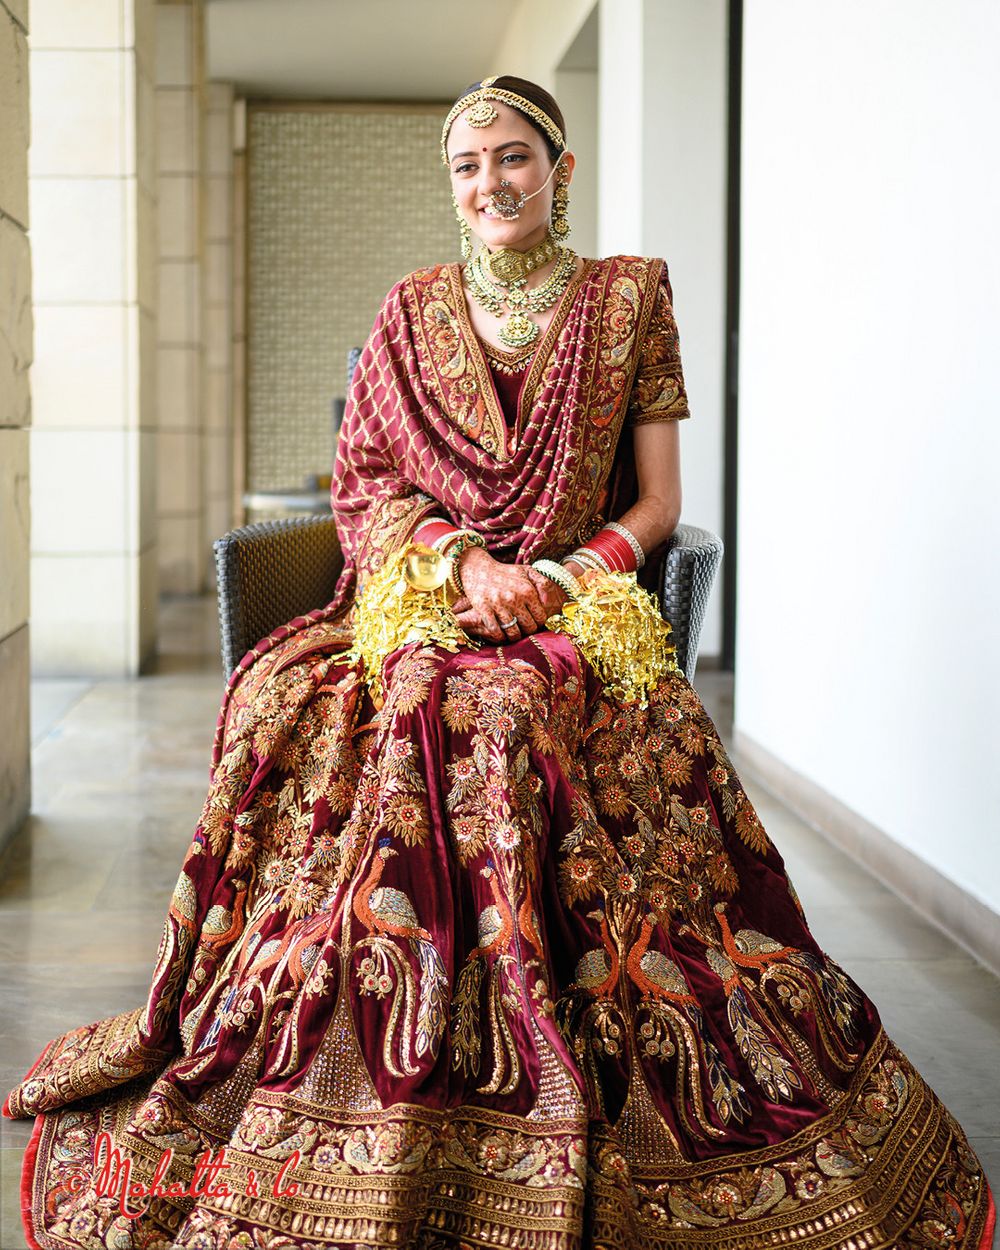 Photo of Bride dressed in a regal lehenga with peacock motifs.